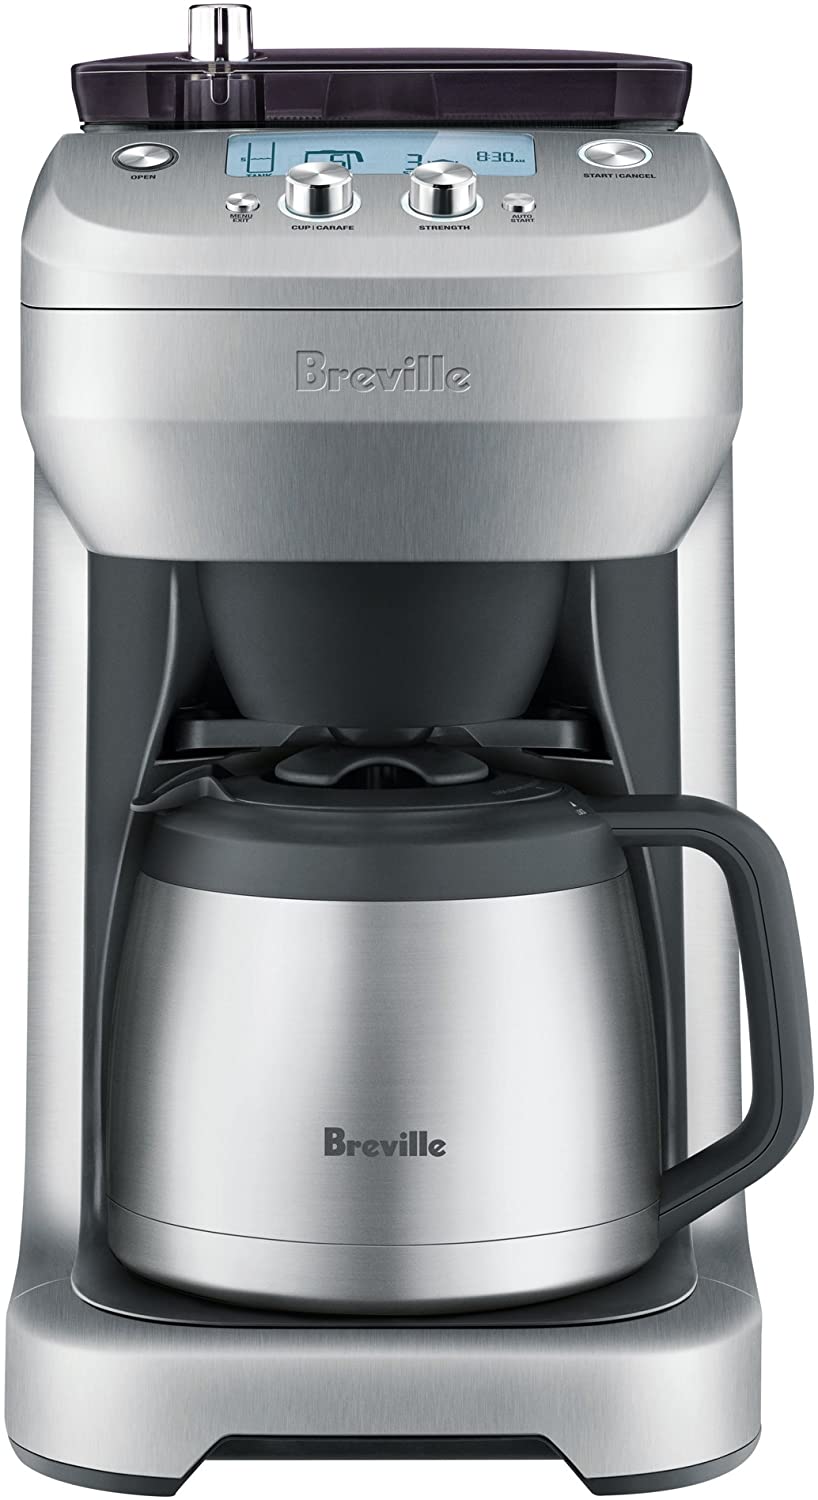 Breville Grind Control LCD Display Balanced Coffee Maker